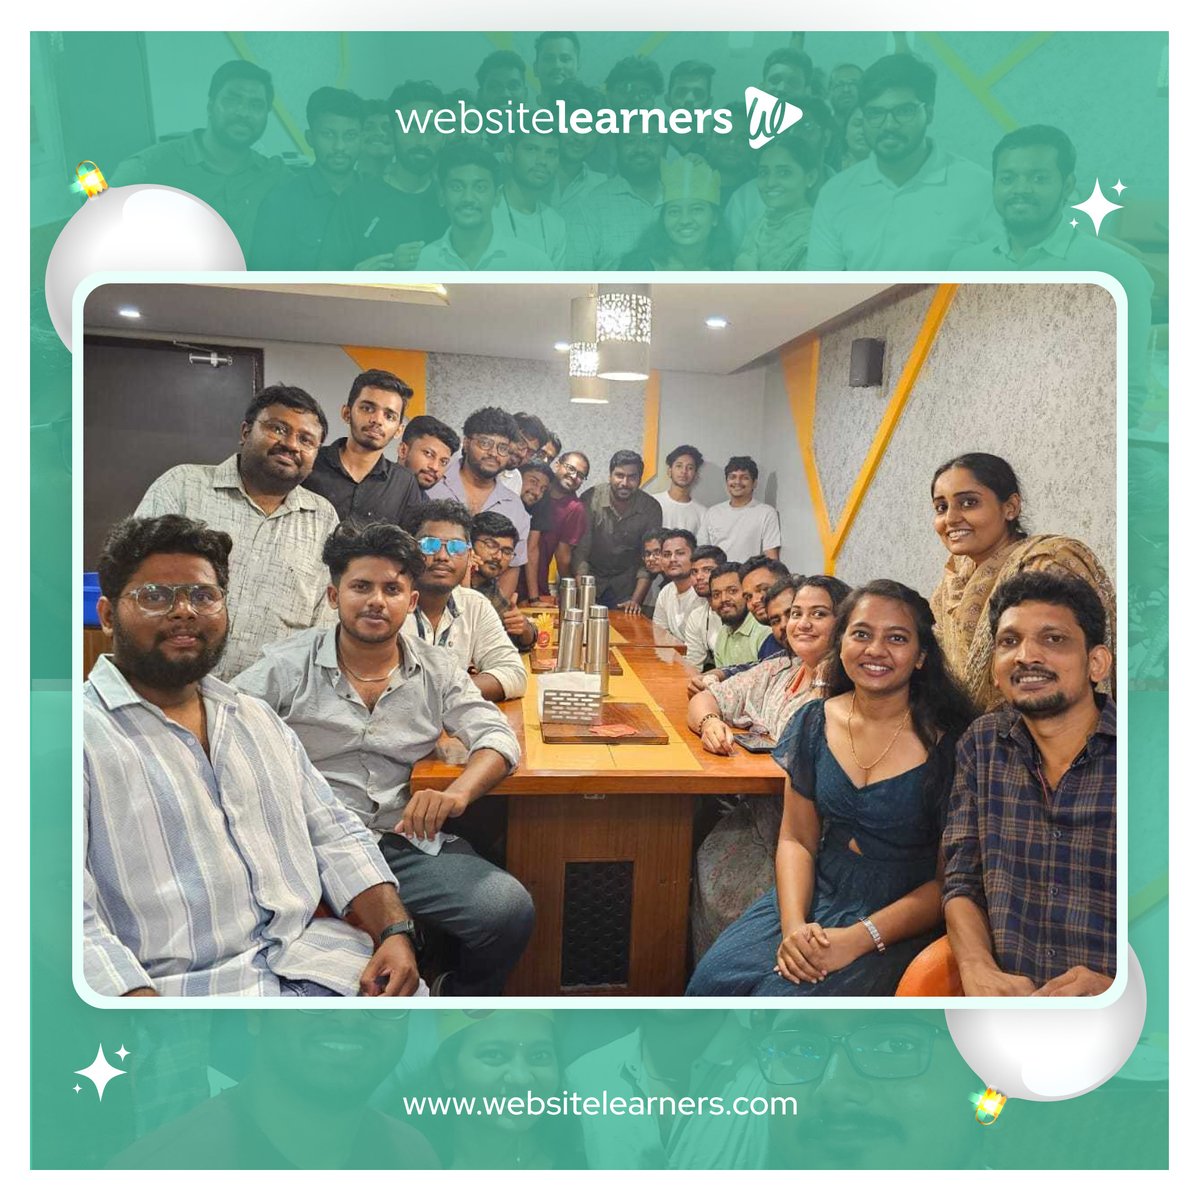 Creating memories and strengthening bonds! 🤝 Our team's day out was a blast 🎉, full of laughter 😆 and great vibes! ✨

#TeamBonding #CompanyOuting #WorkFamily #WebsiteLearners #TeamOuting #TeamLunch